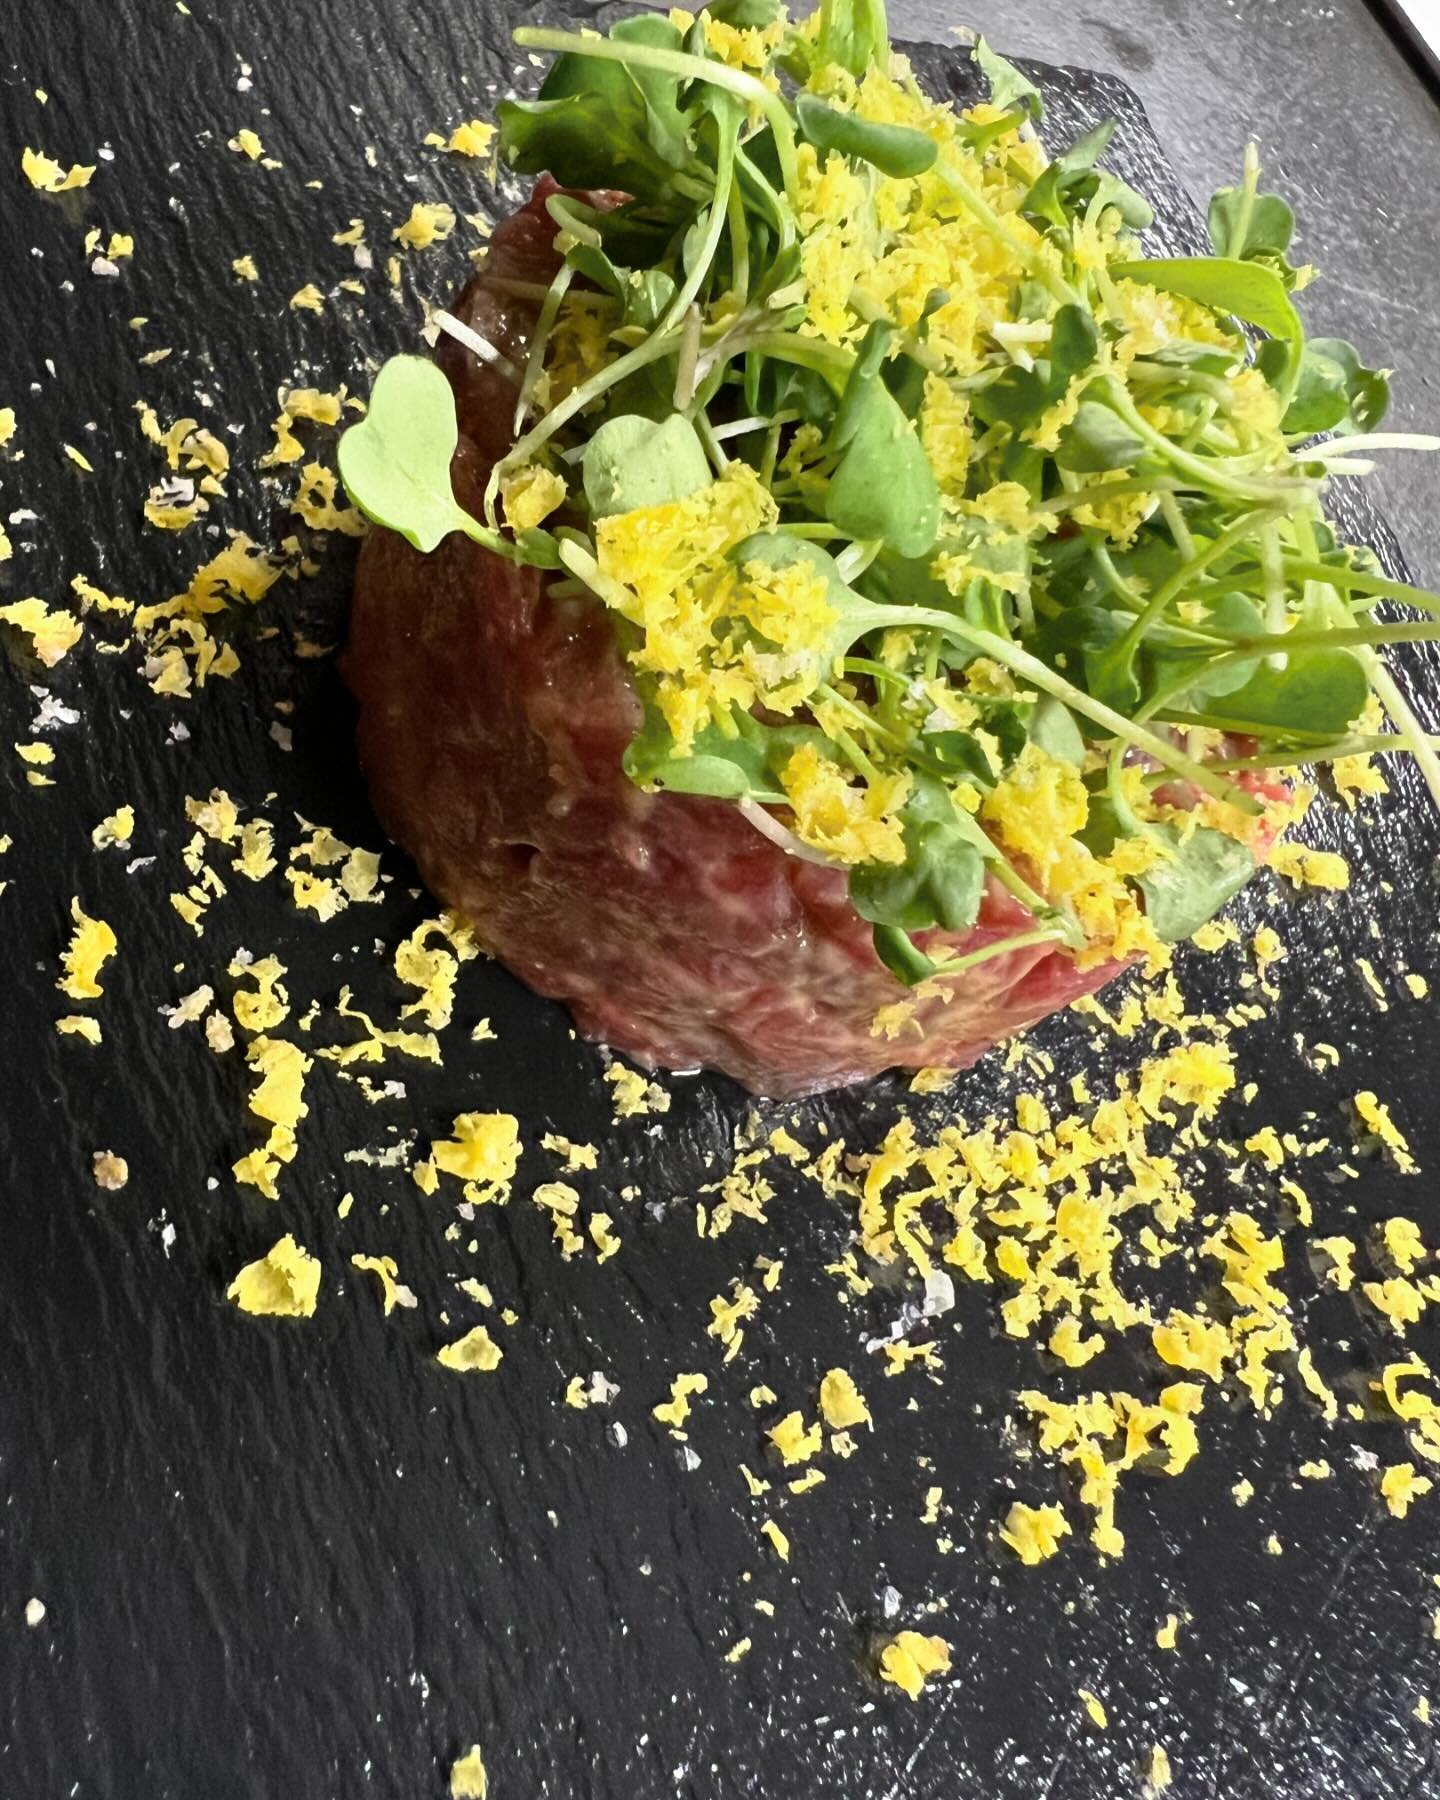 😋 Steak Tartare, made with New York Strip and Ribeye, topped with Shaved Balsamic Cured Egg Yolk.